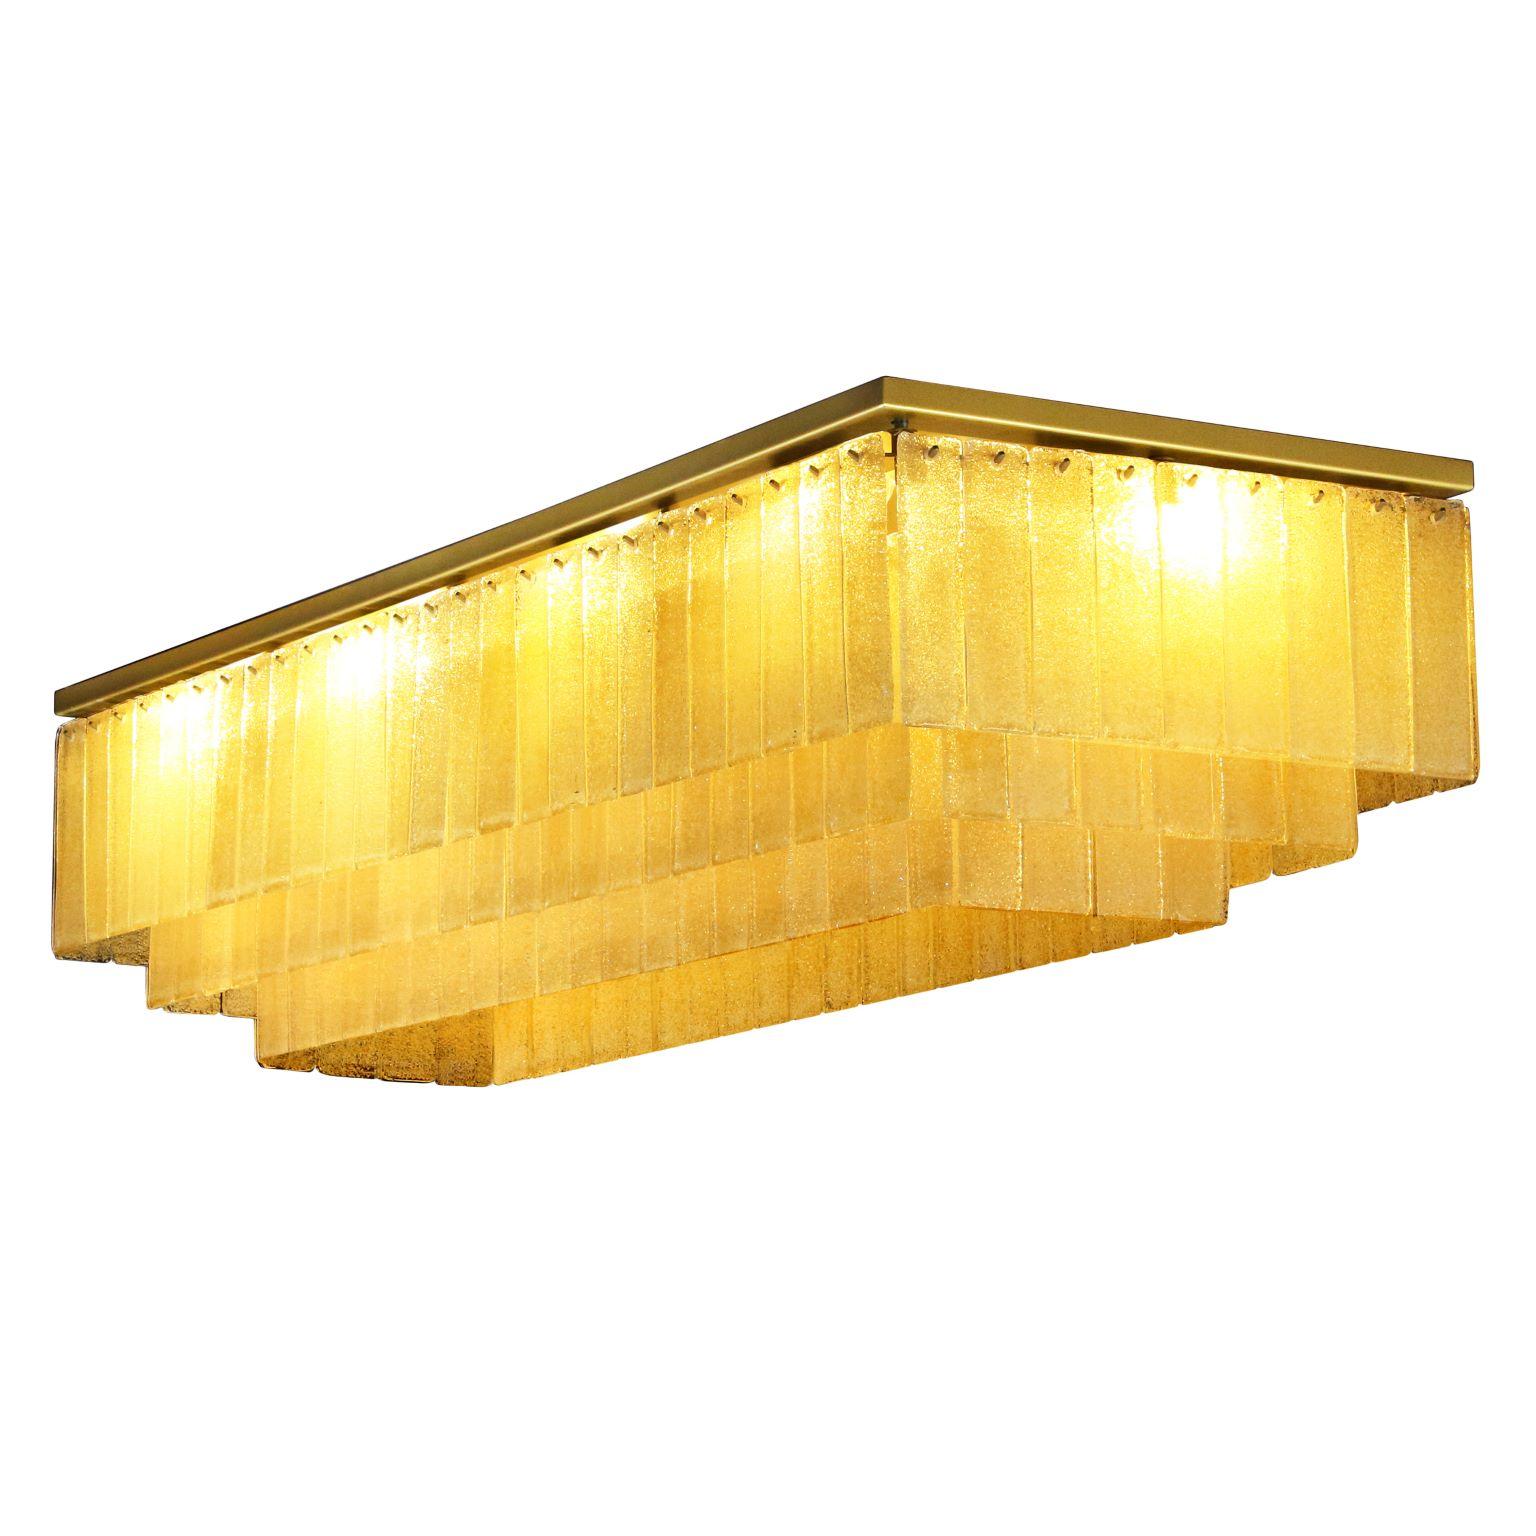 Charleston ceiling light, ambergraniglia glass listels, gold rectangular fixture by Multiforme
The modern style ceiling light Charleston, from our Progressive collection, is an extremely versatile lighting work that can be customized in many